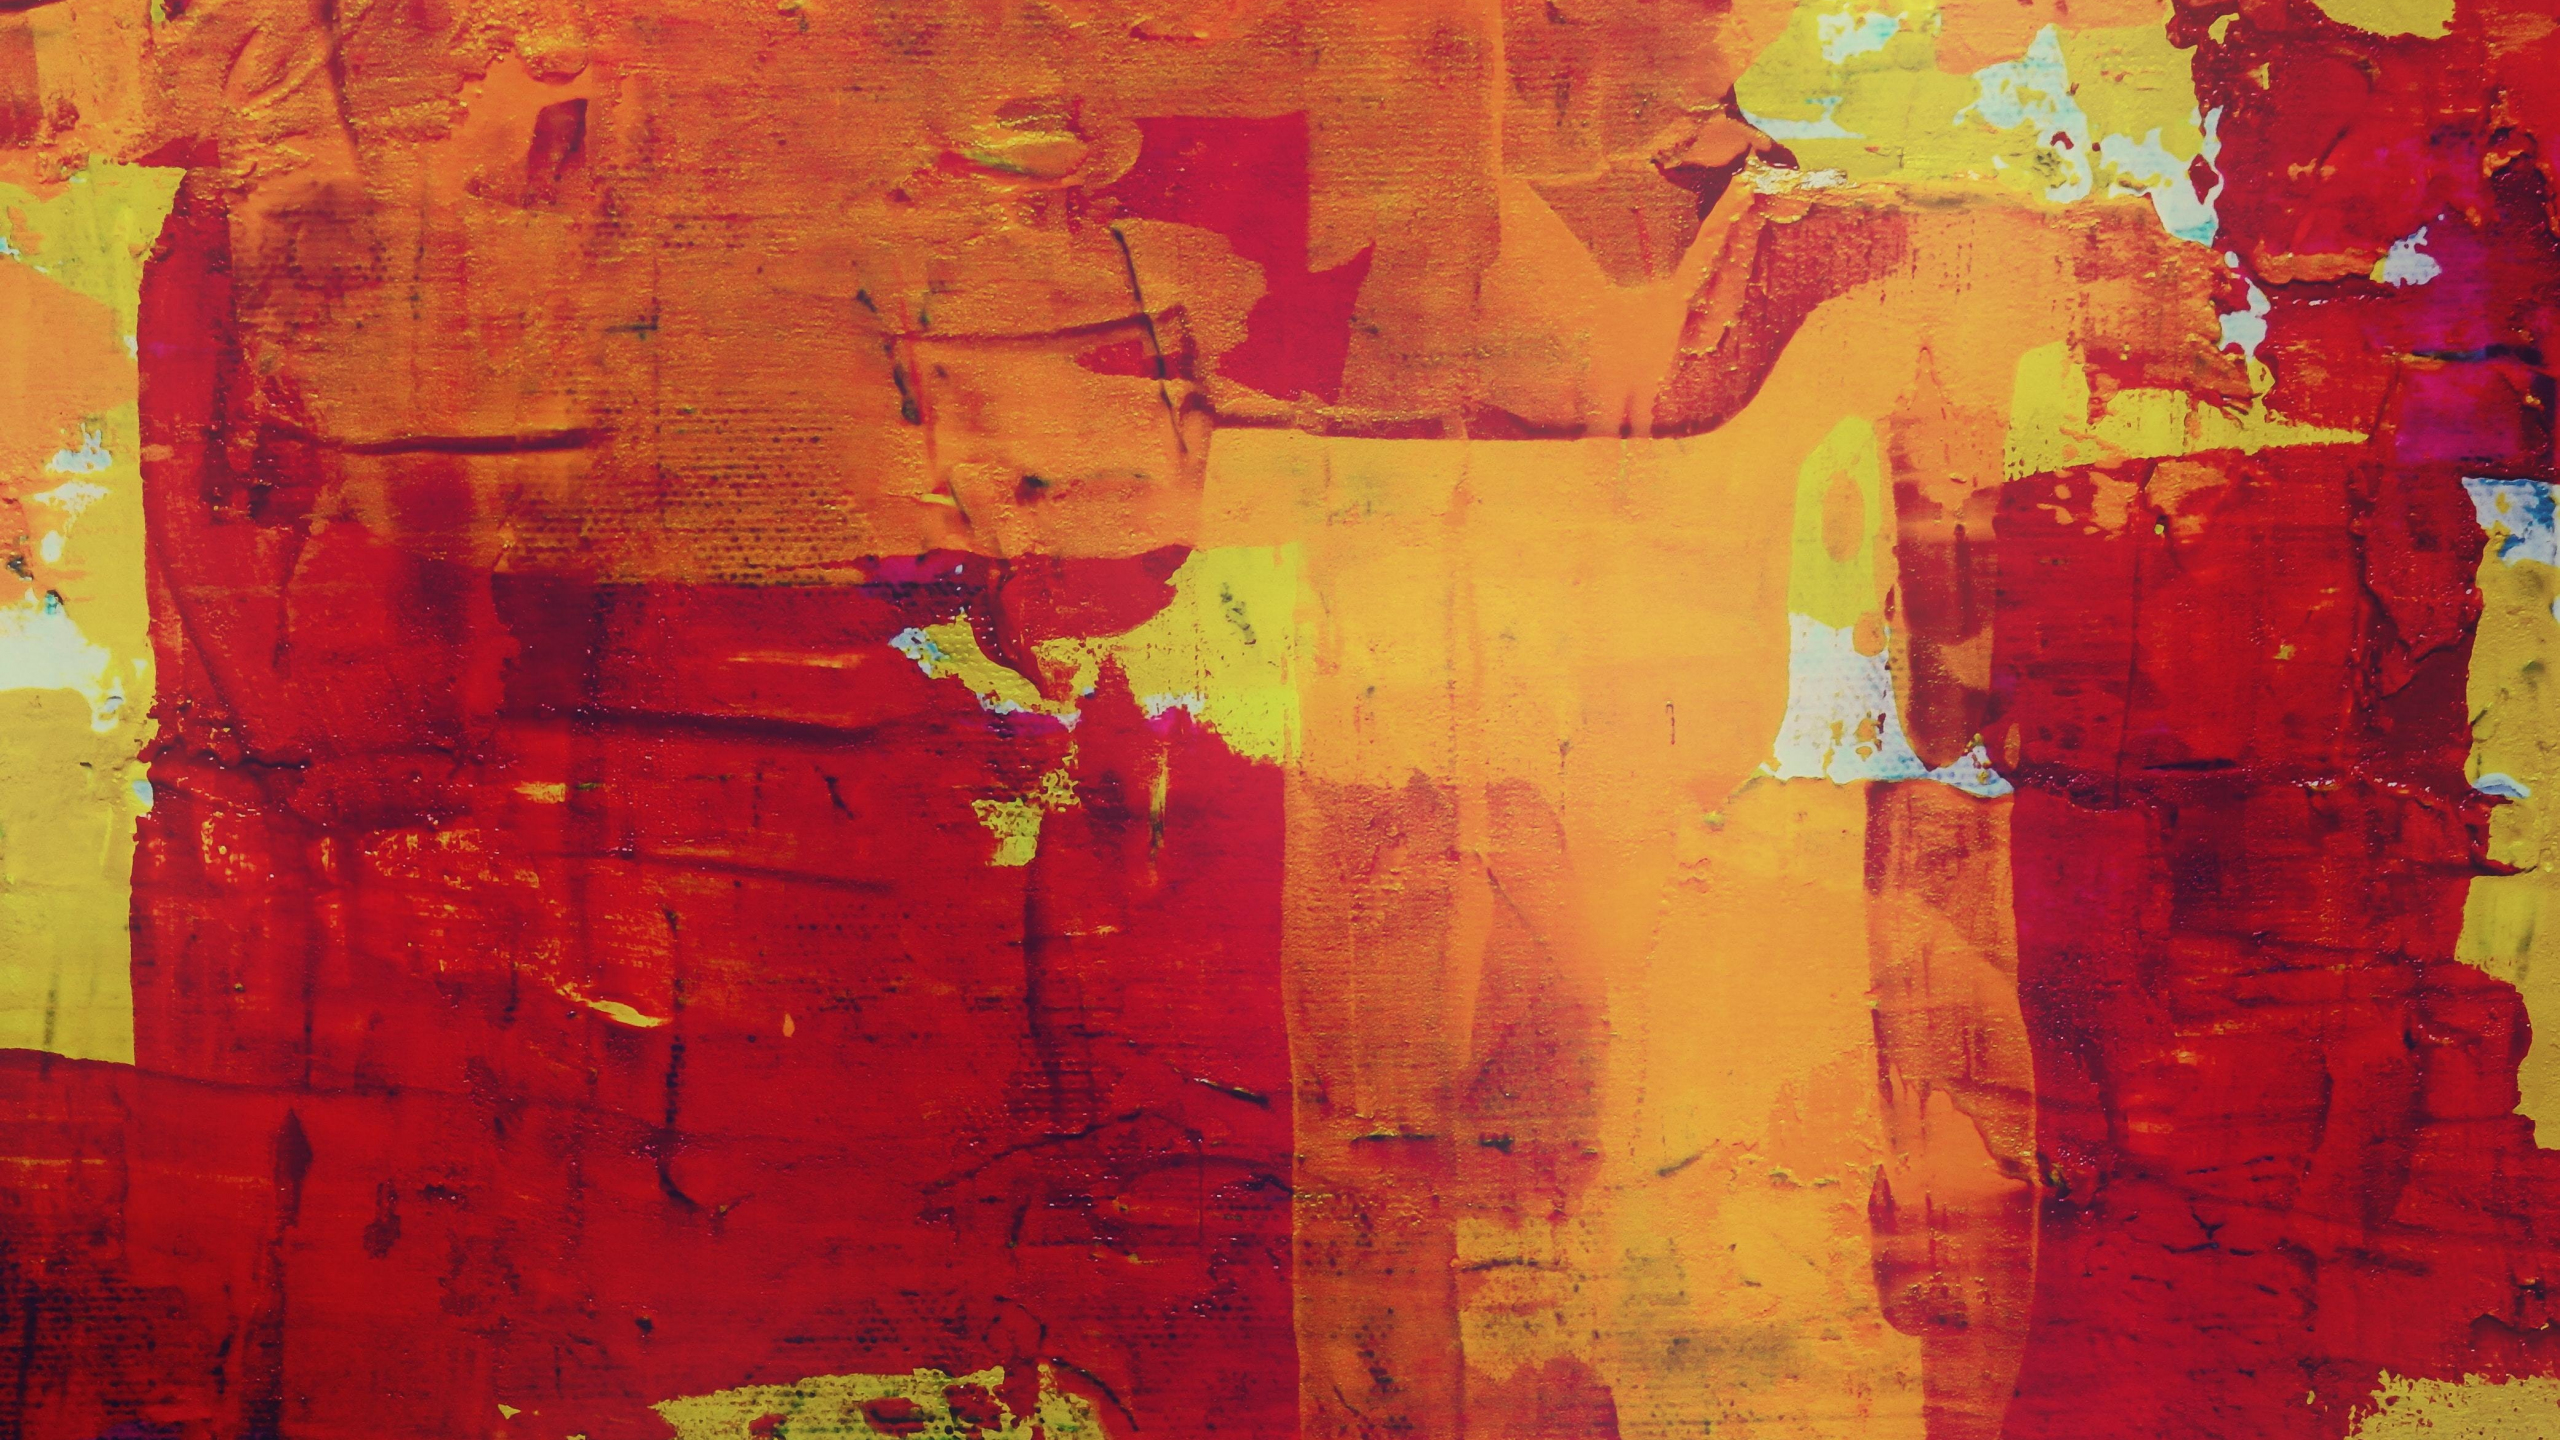 Download 2560x1440 wallpaper abstract, red-yellow, canvas, art, dual wide, widescreen 16:9